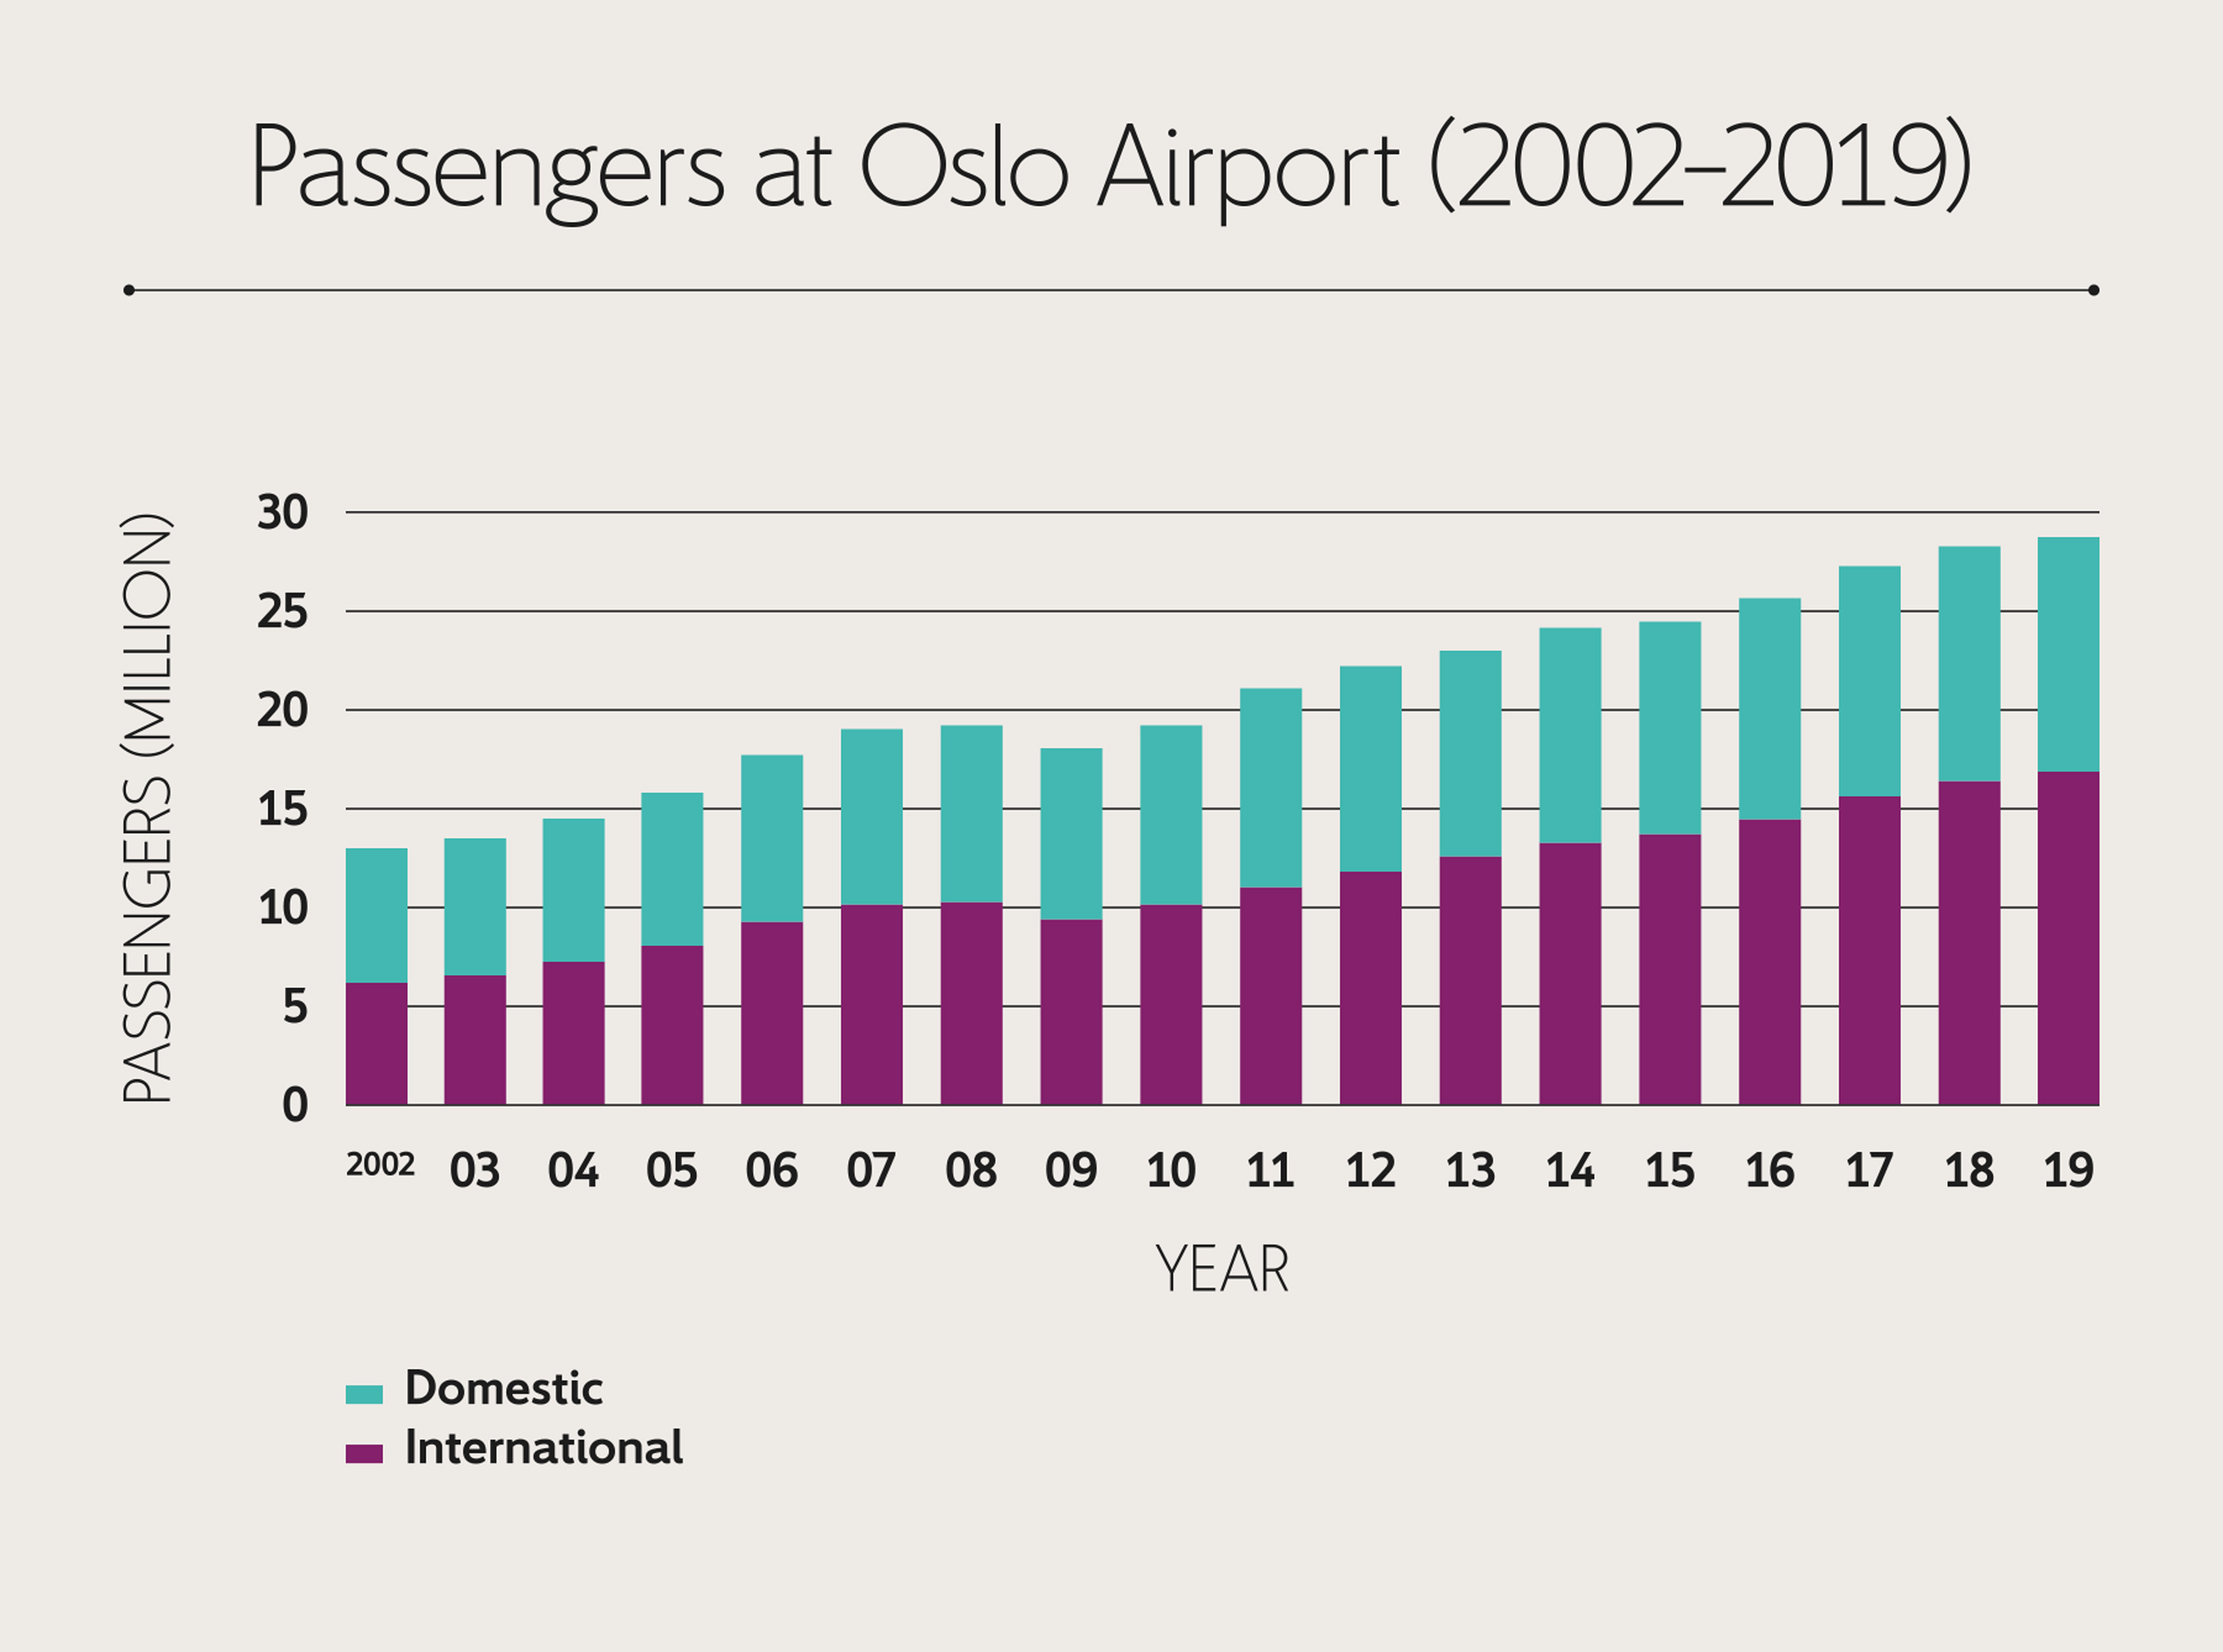 Passengers at Oslo Airport from 2008-2019